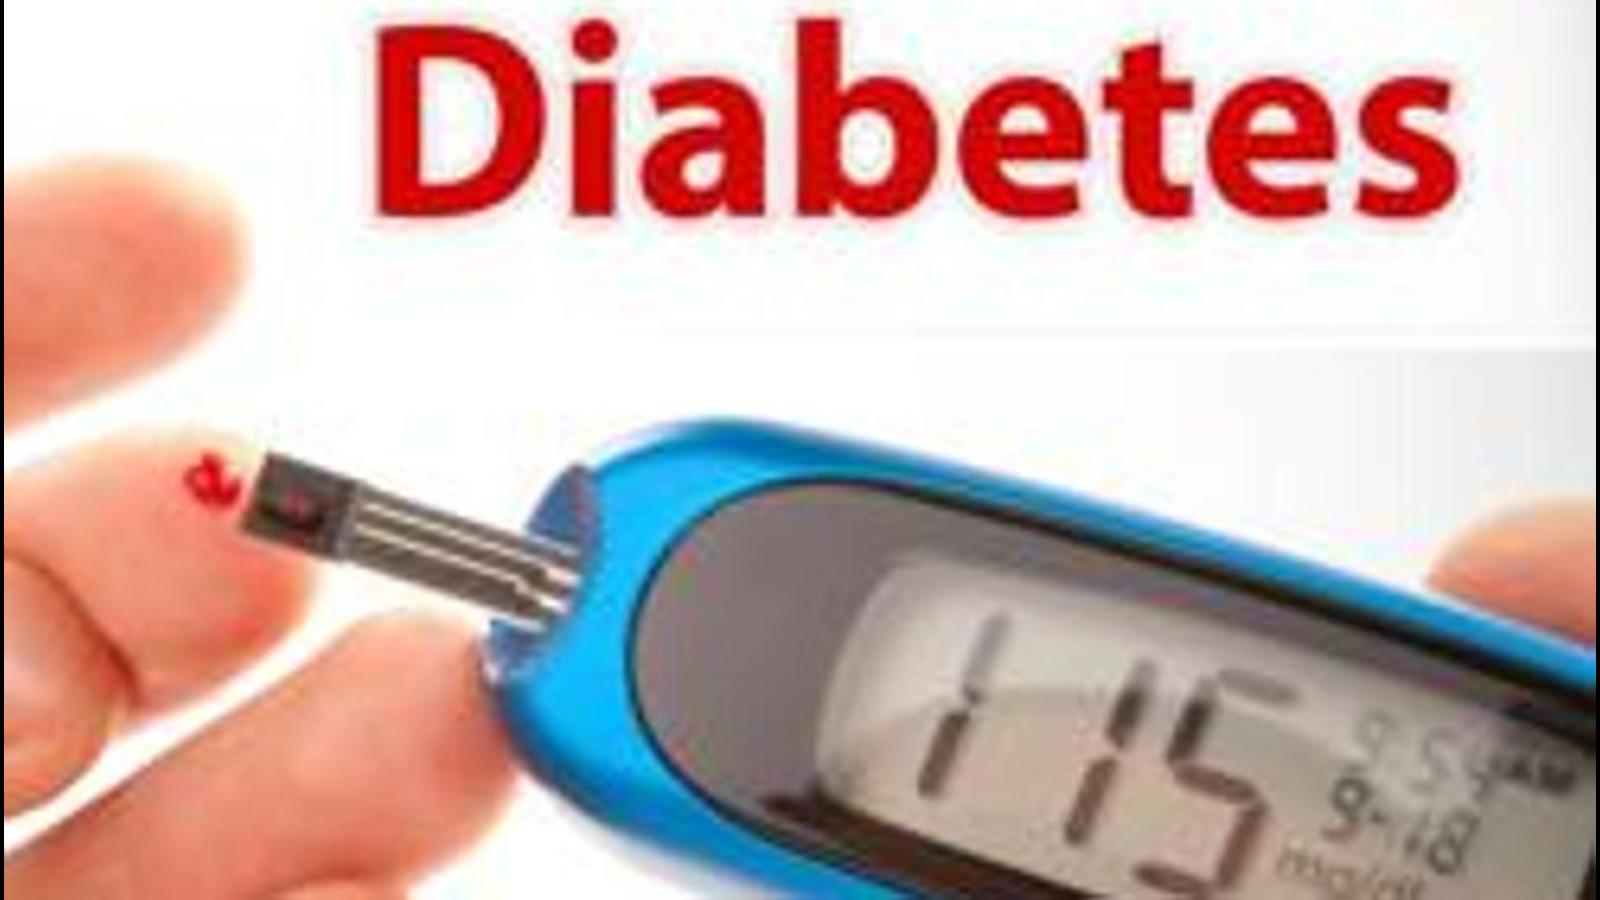 In Chandigarh, women are more prone to diabetes - Hindustan Times